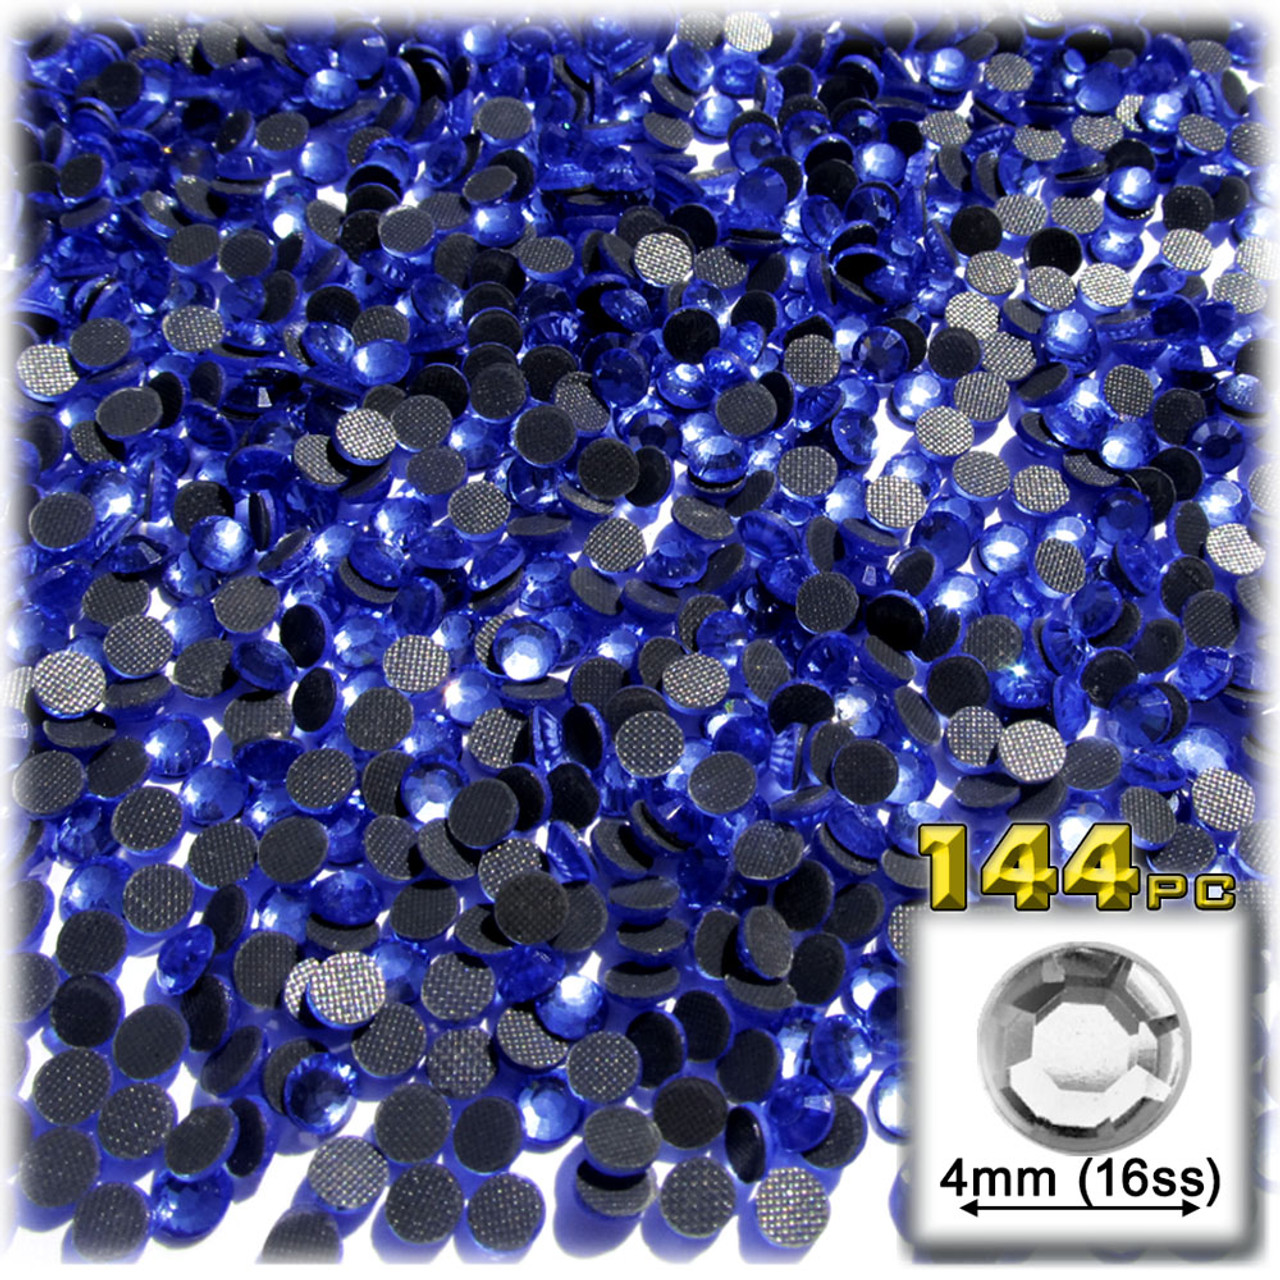 Meibite 6616pcs Navy Blue Hotfix Rhinestones Crystal Glass Gemstones for Tumblers Clothes Shirts Bling Flat Back Round with Tweezers and Picking Pen